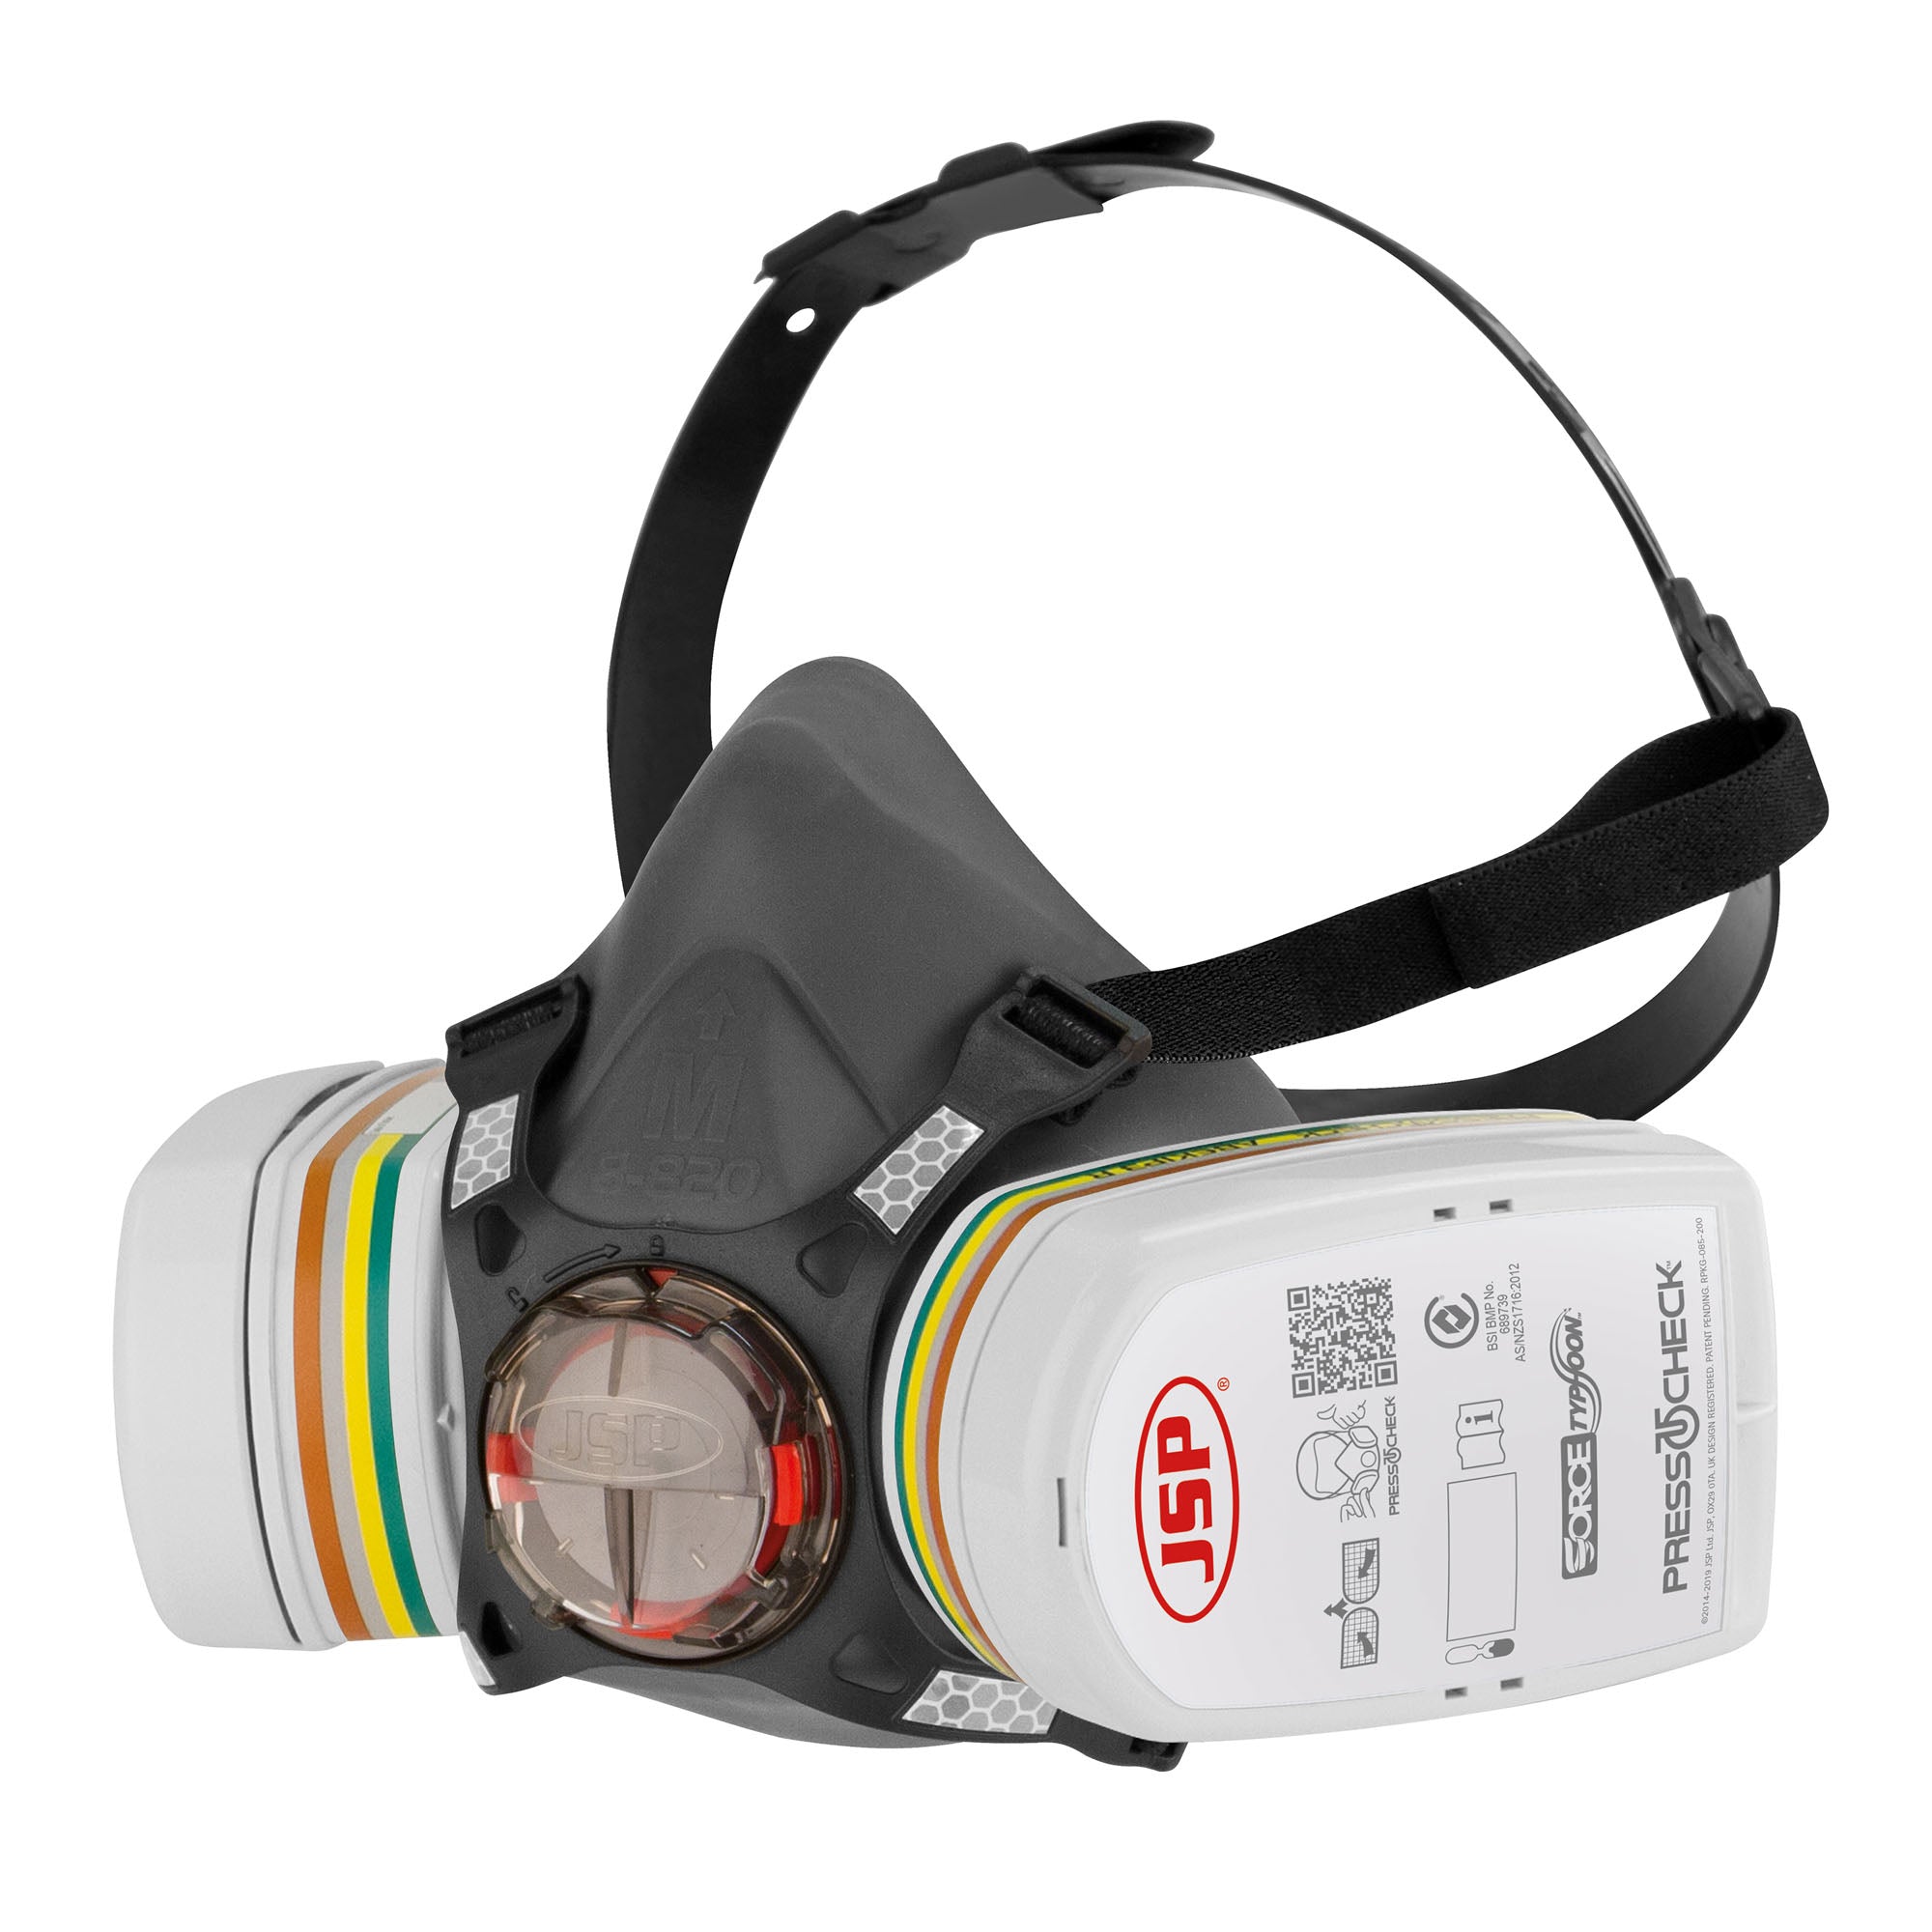 JSP Force8 Half Face Mask Respirator with PressToCheck - ABEK1P3 Filters